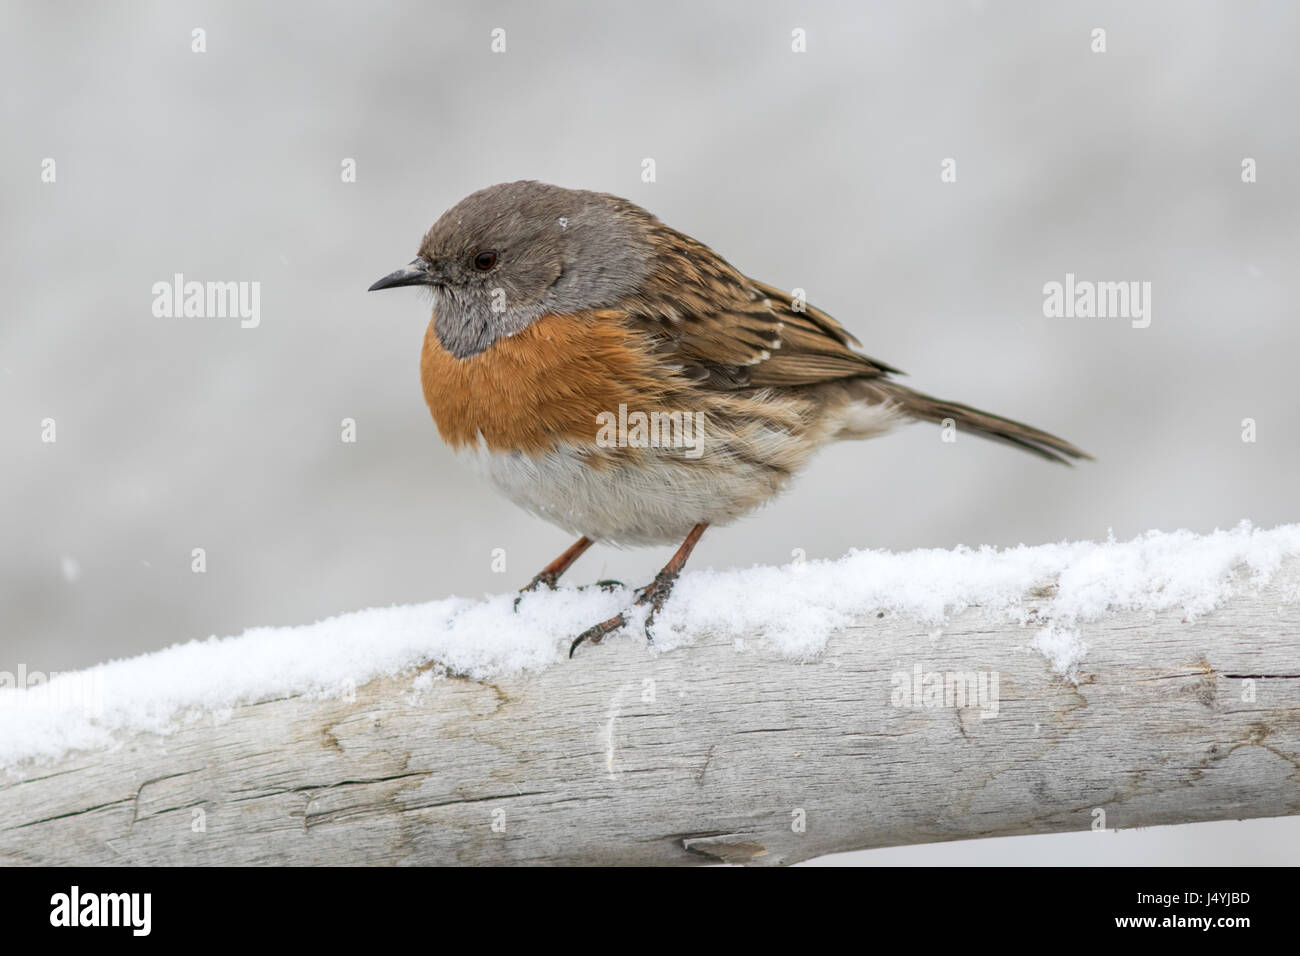 The robin accentor (Prunella rubeculoides) perched on bark in heavy snow Hemis National Park, Ladakh, India. Stock Photo